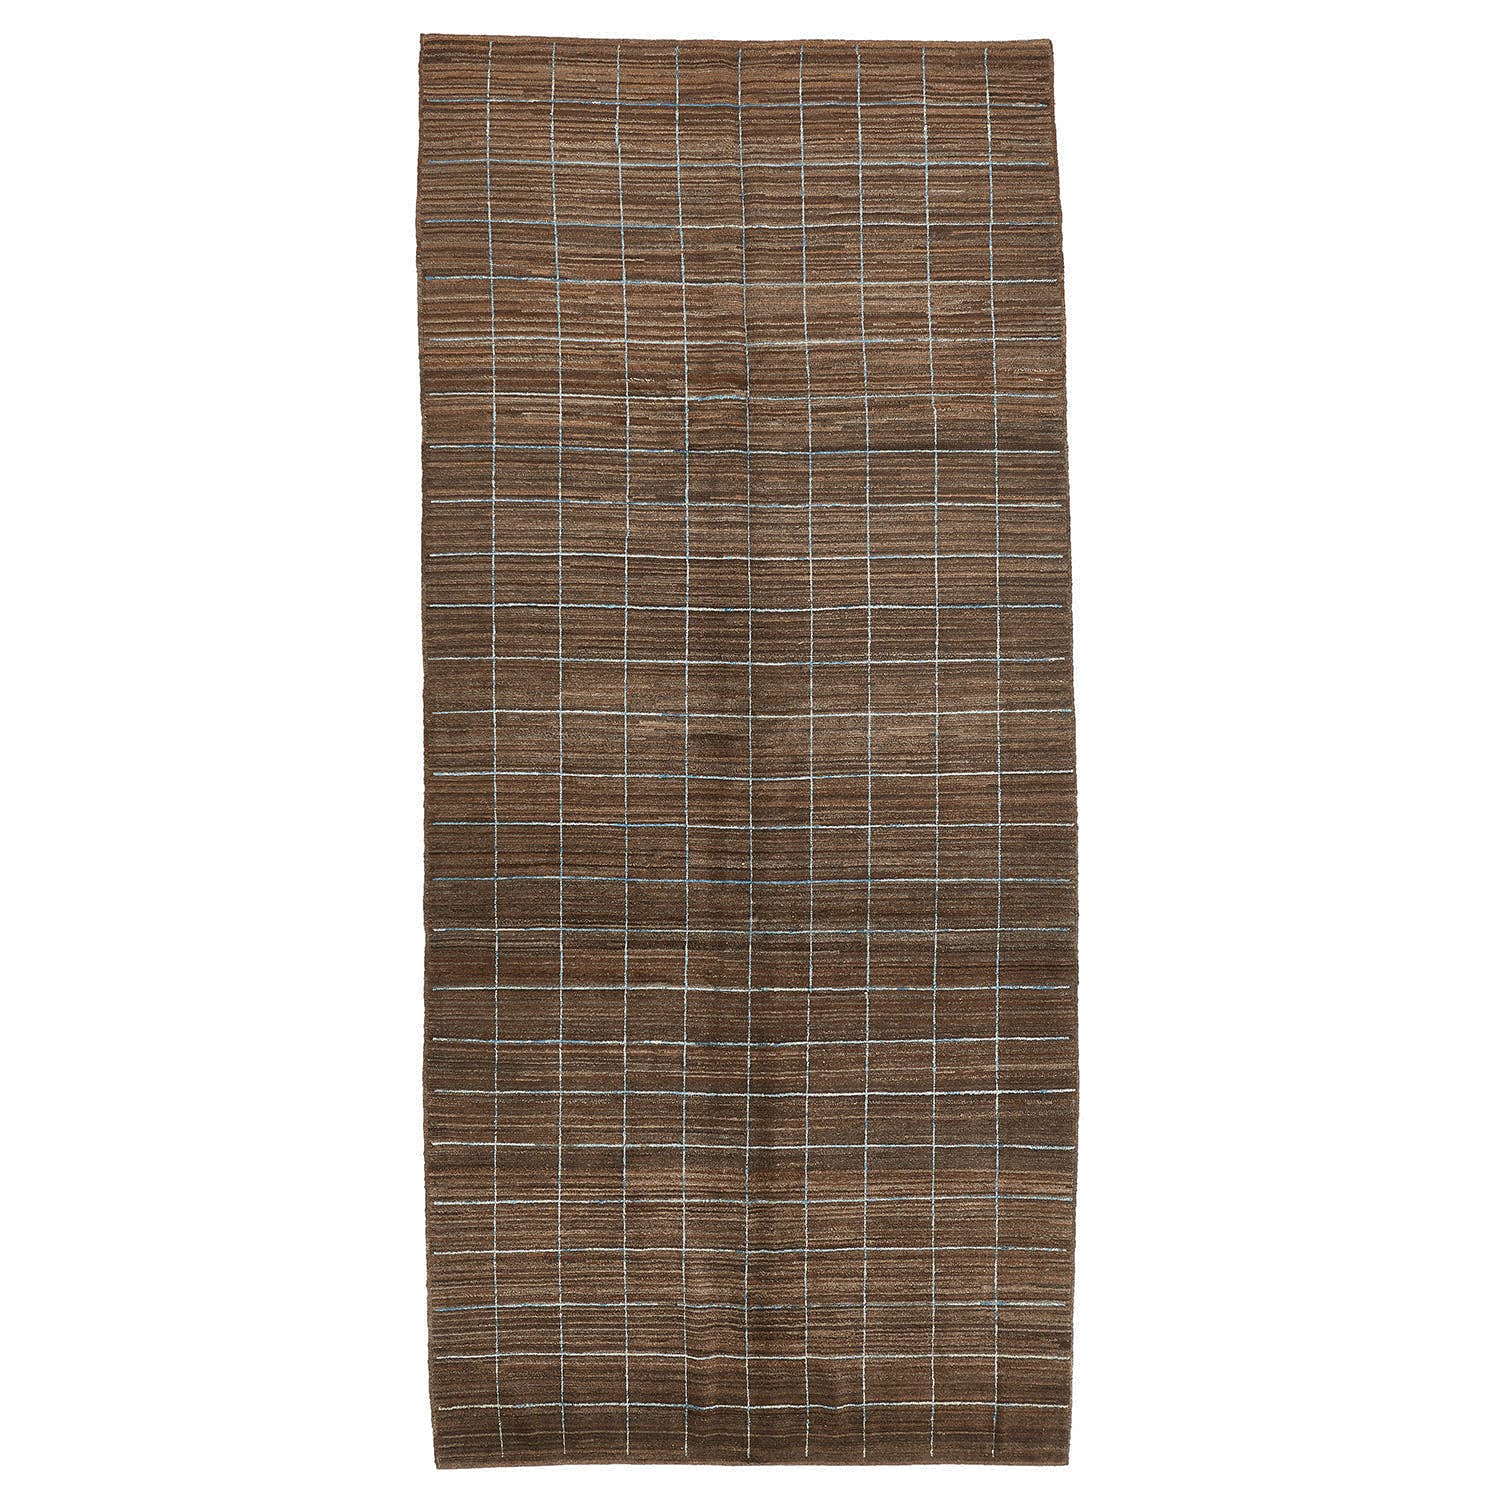 Moroccan Style Rug - 5'x10'11" Default Title